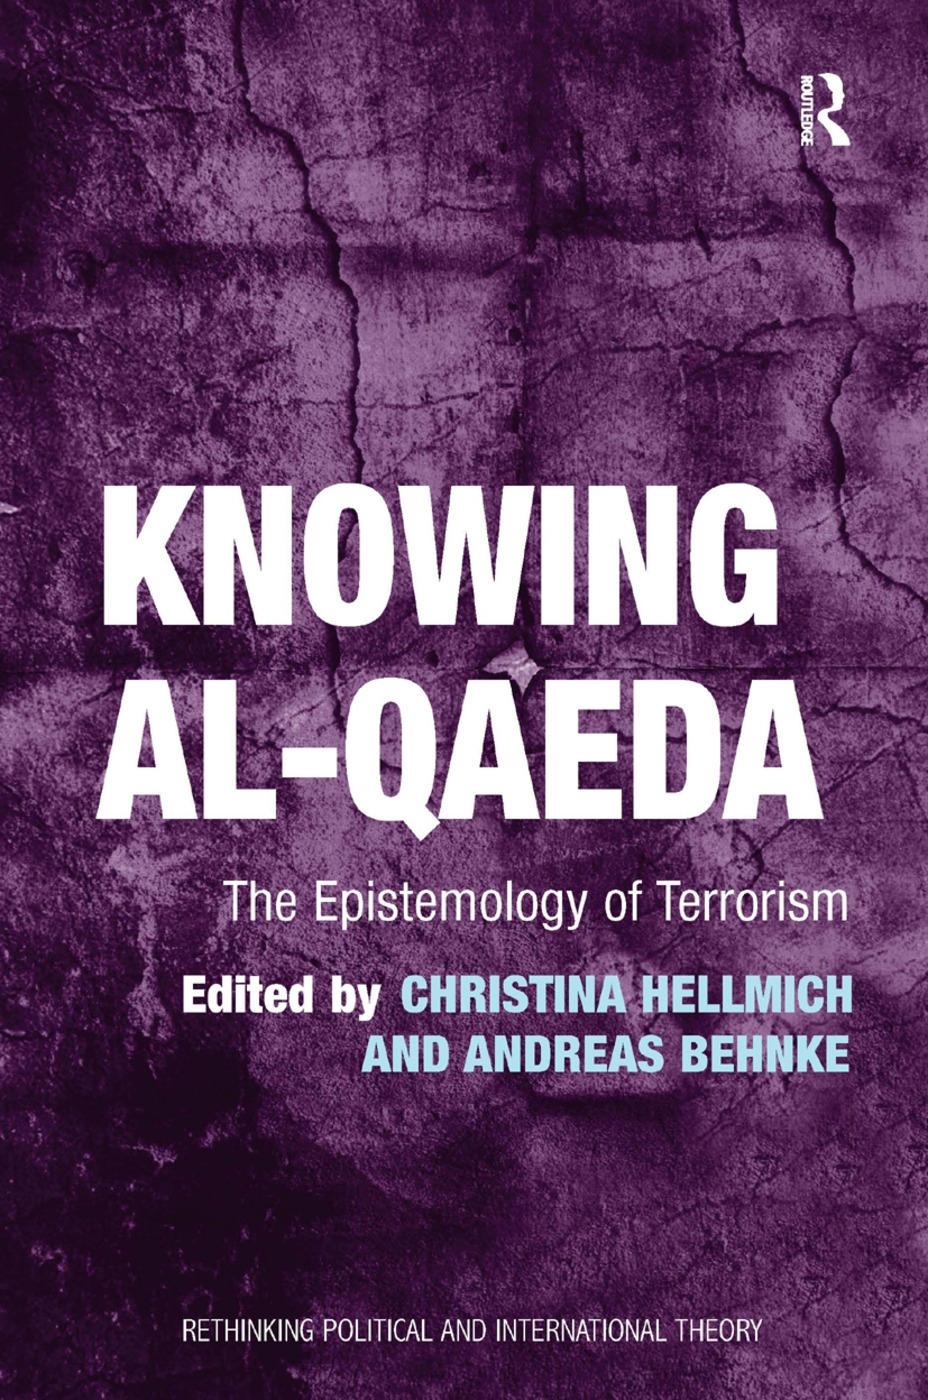 Knowing Al-Qaeda: The Epistemology of Terrorism. Edited by Andreas Behnke and Christina Hellmich